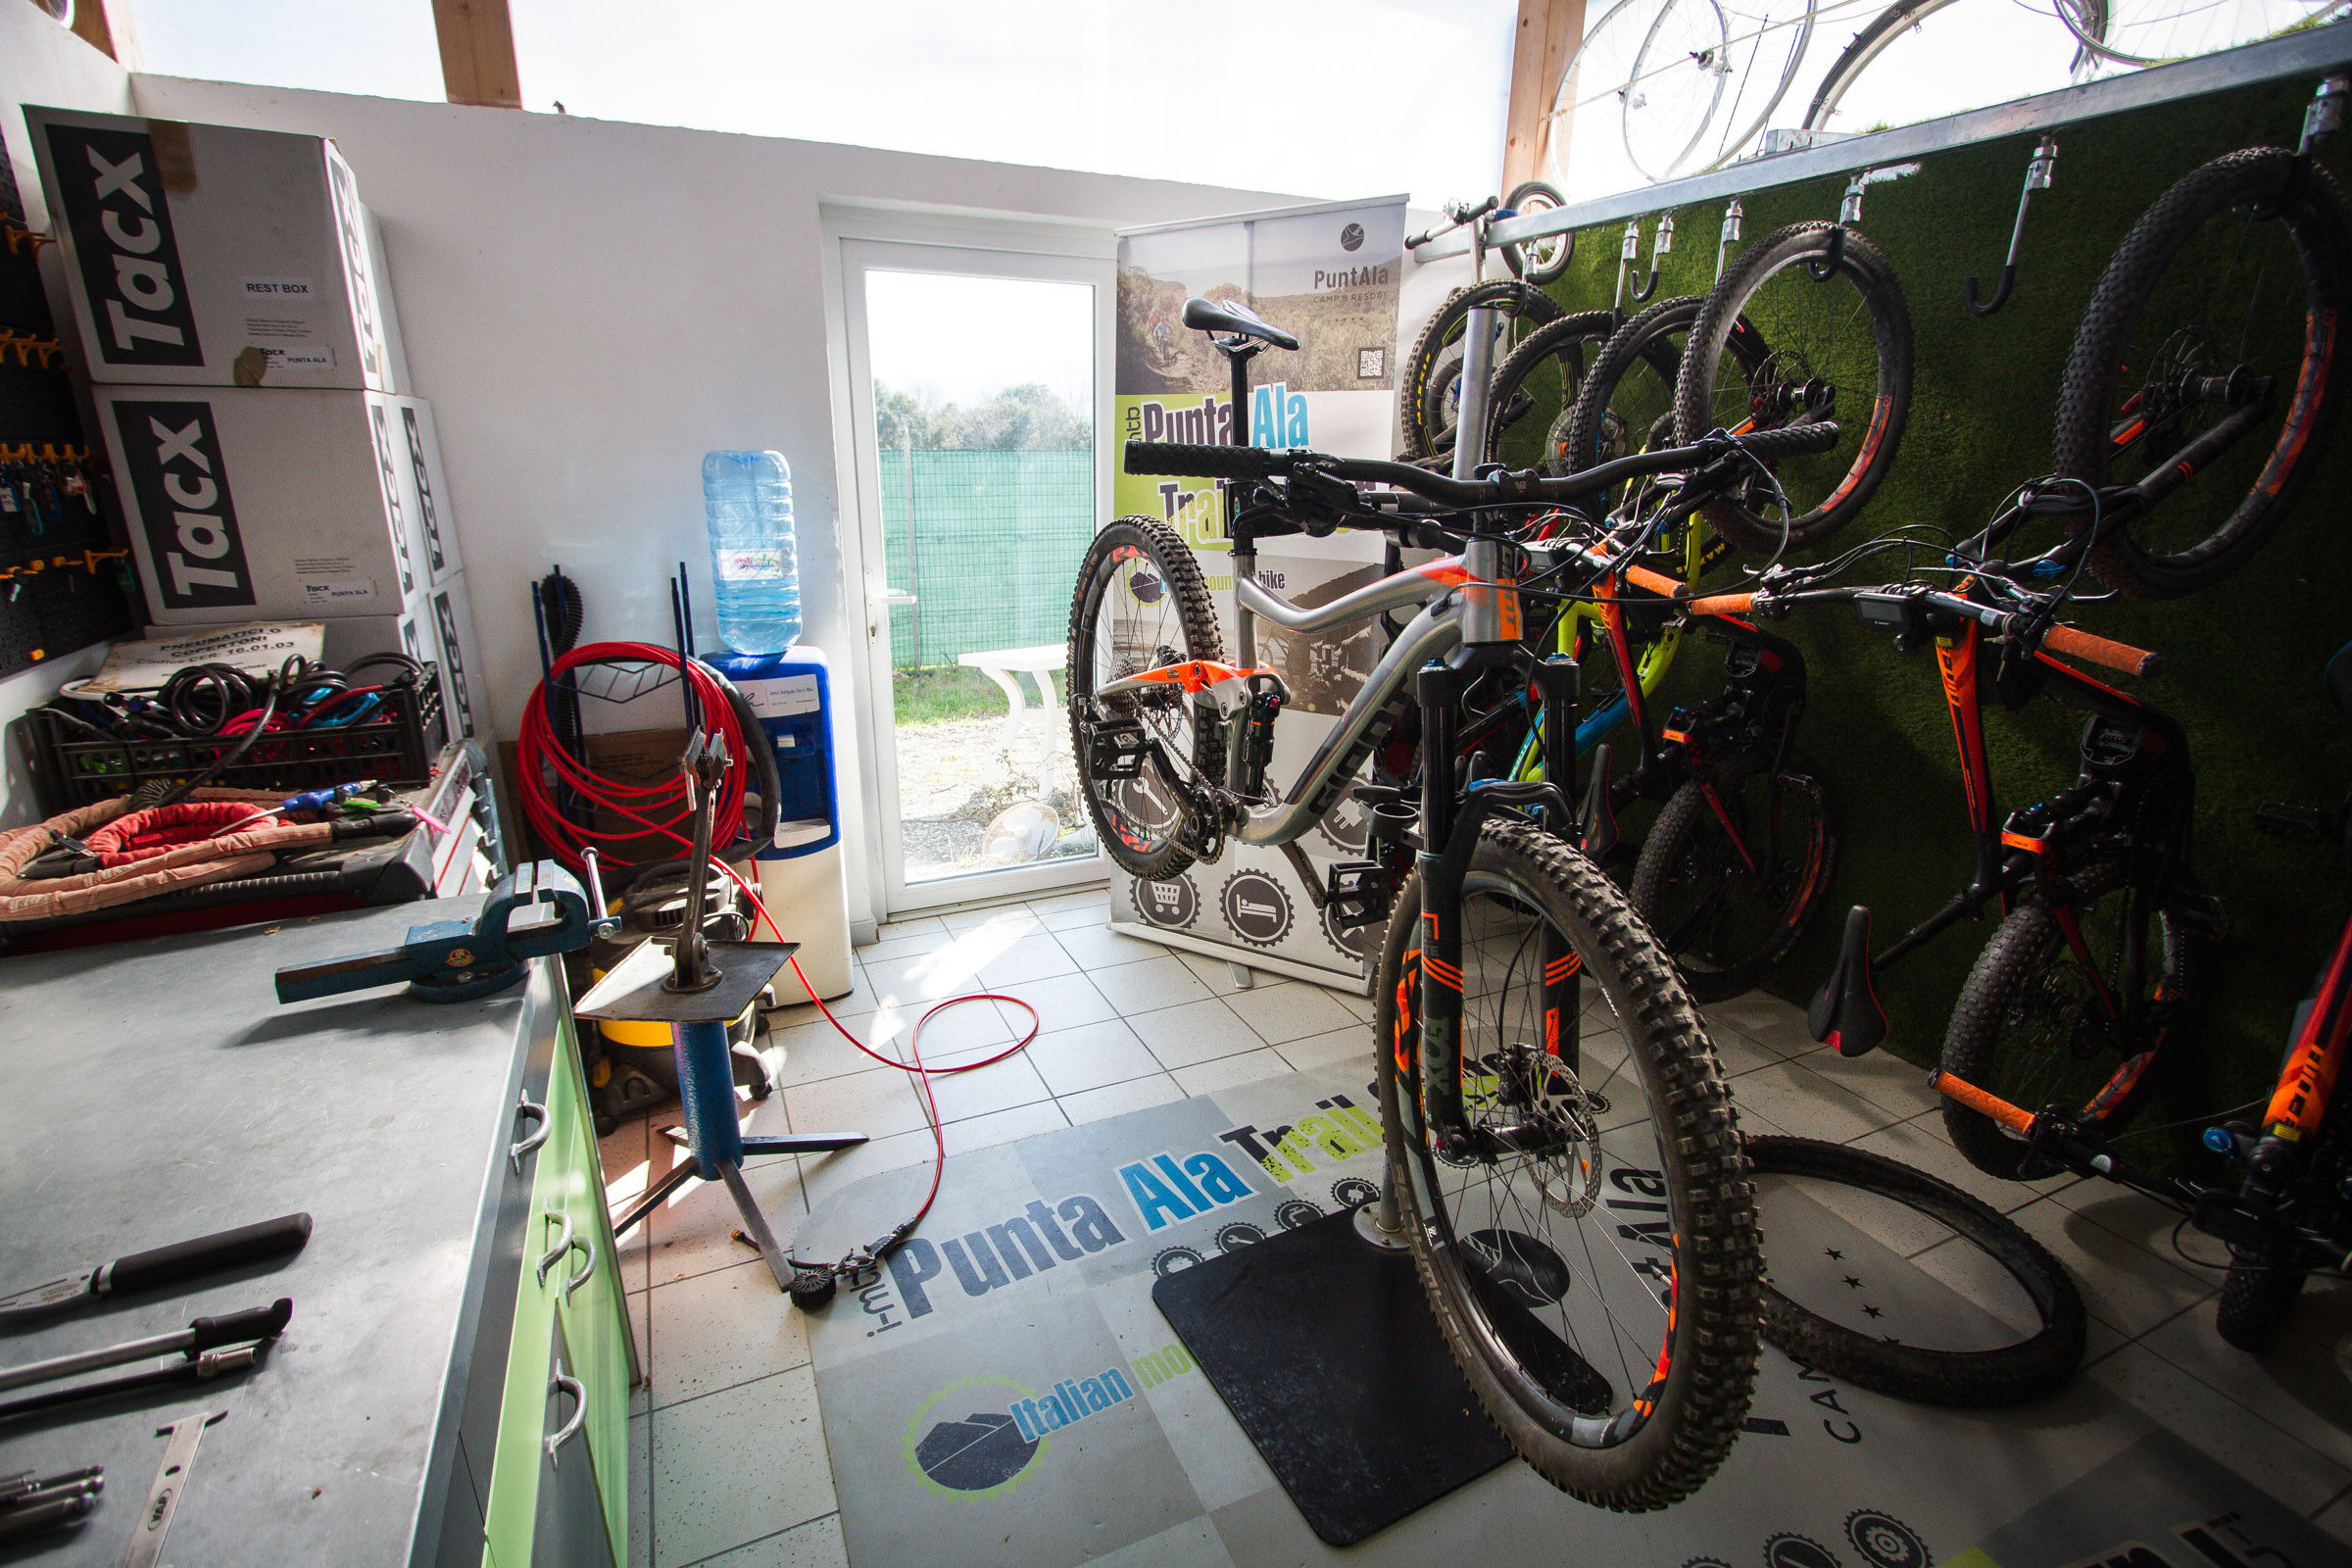 Our Giant Trance Enduro bike in the stand at the Punta Ala Trail Center Repair shop.